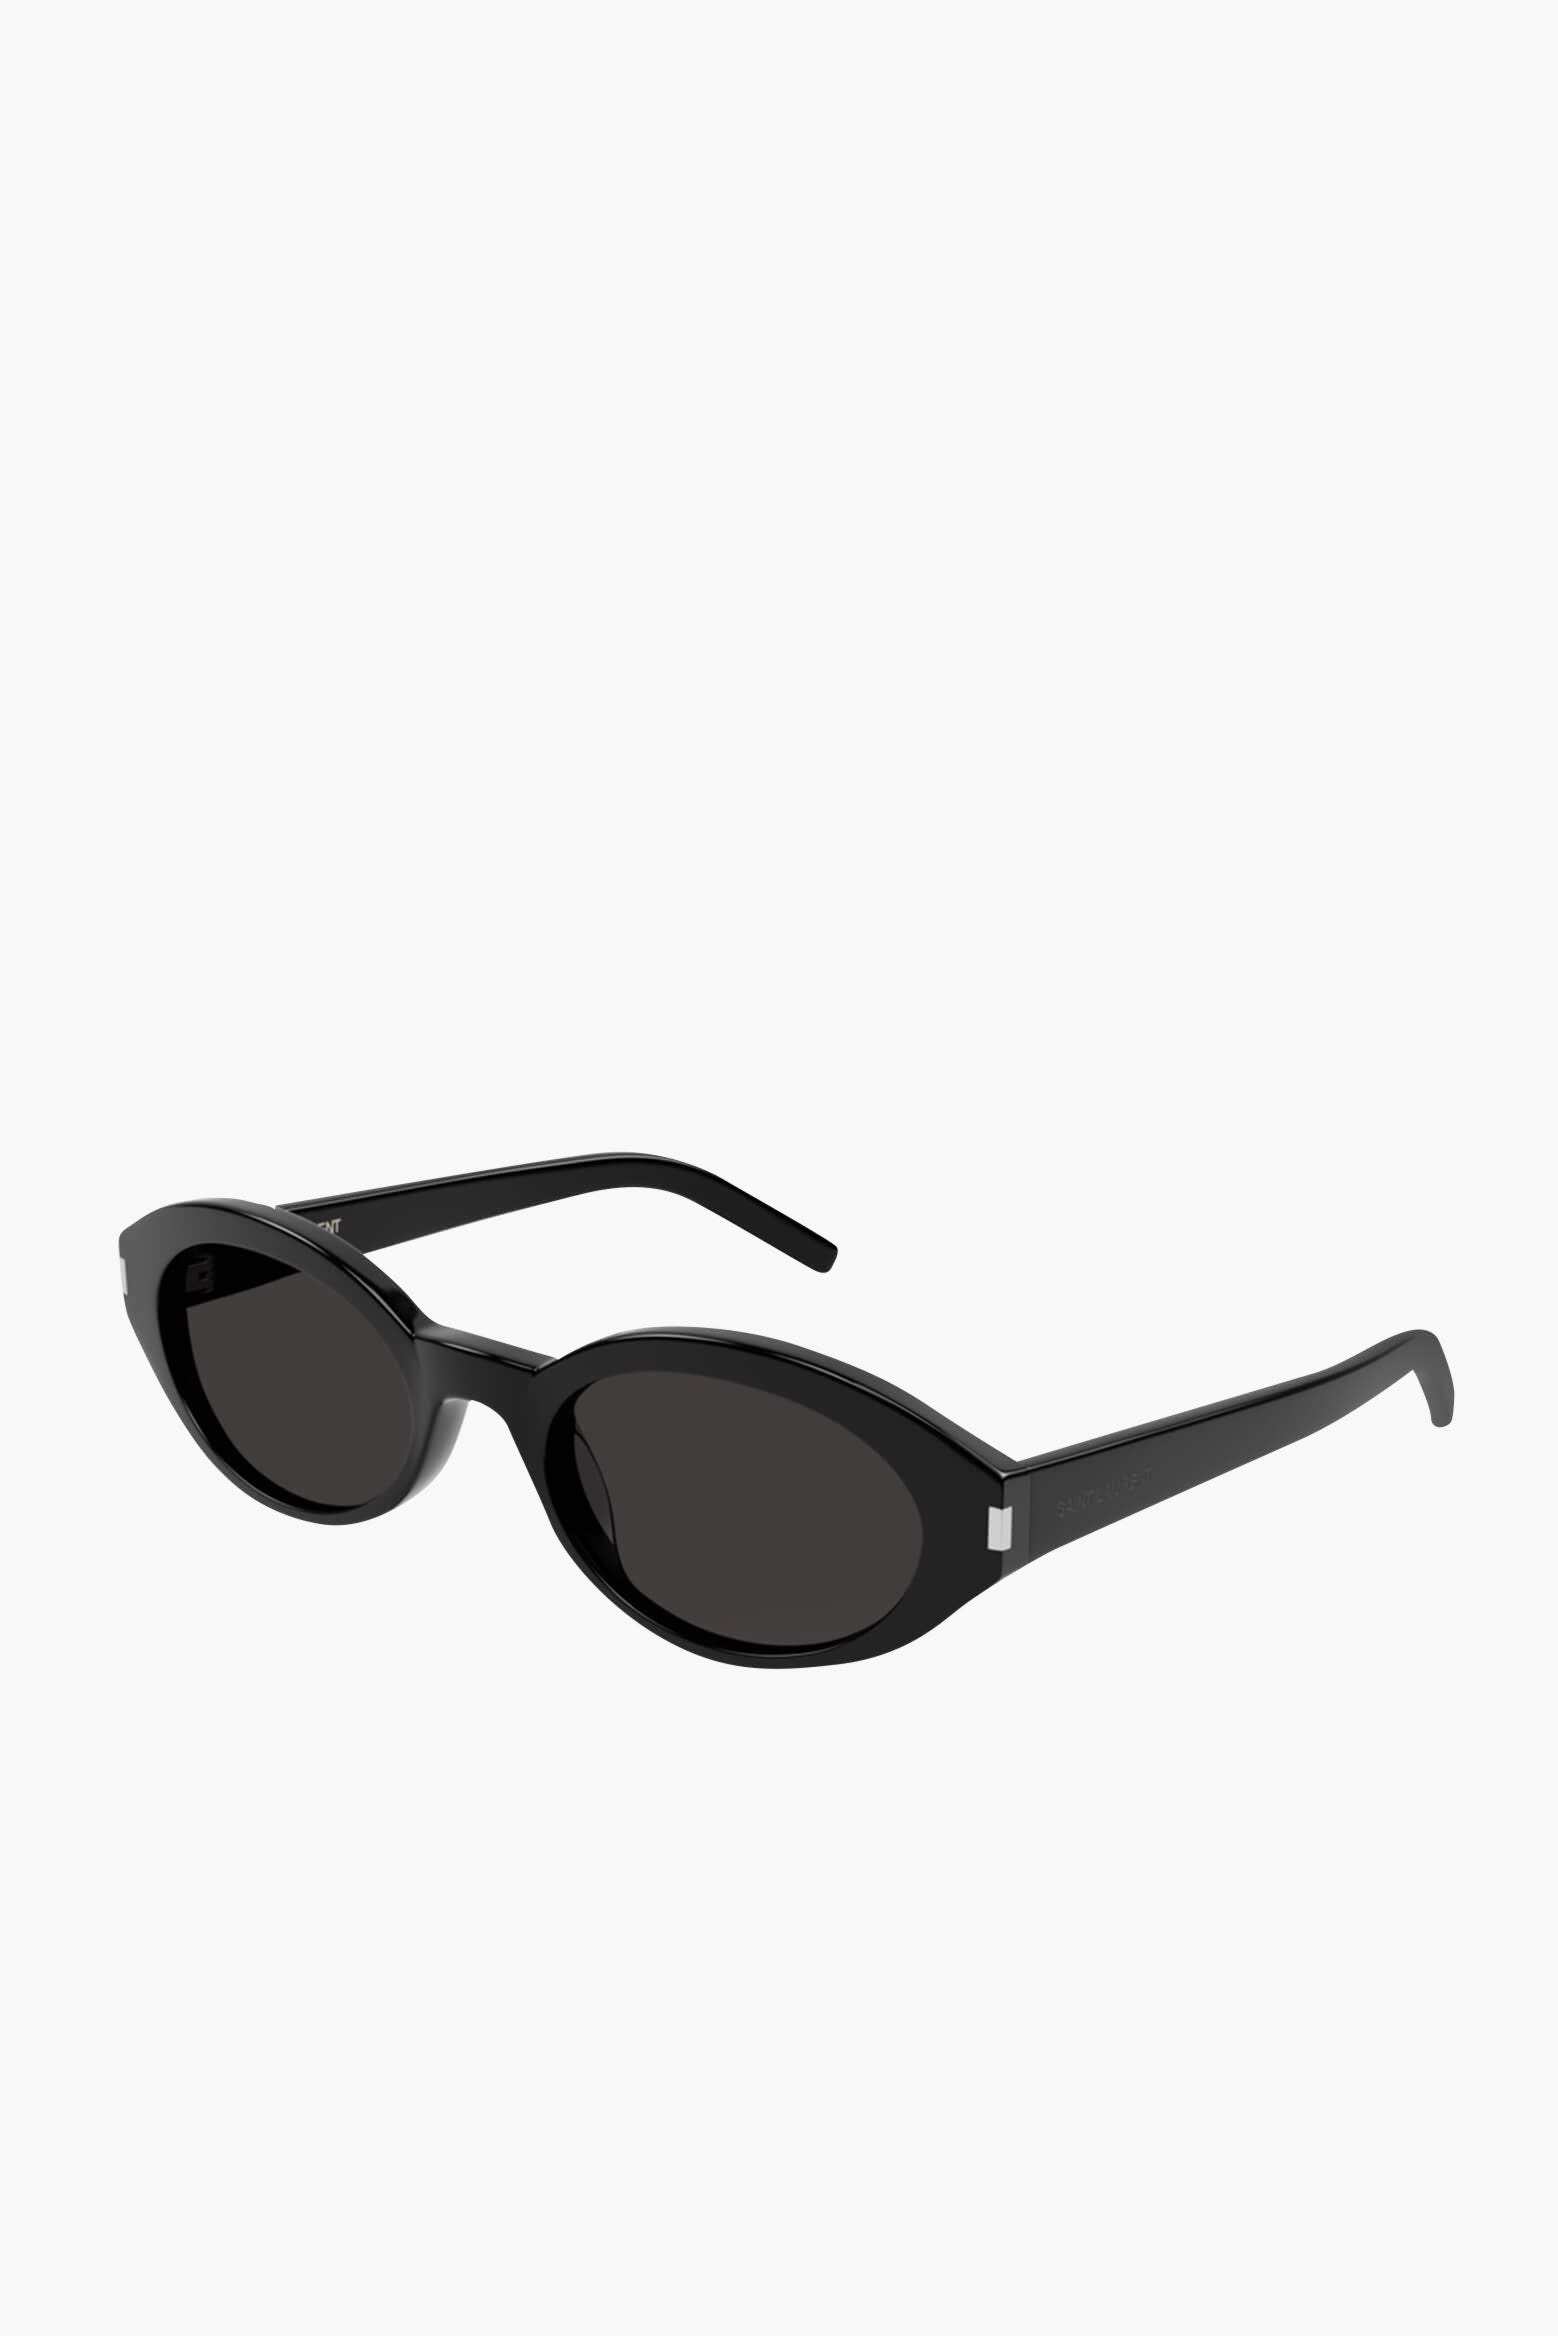 Saint Laurent Rounded Cat Eye Sunglasses in Black available at The New Trend